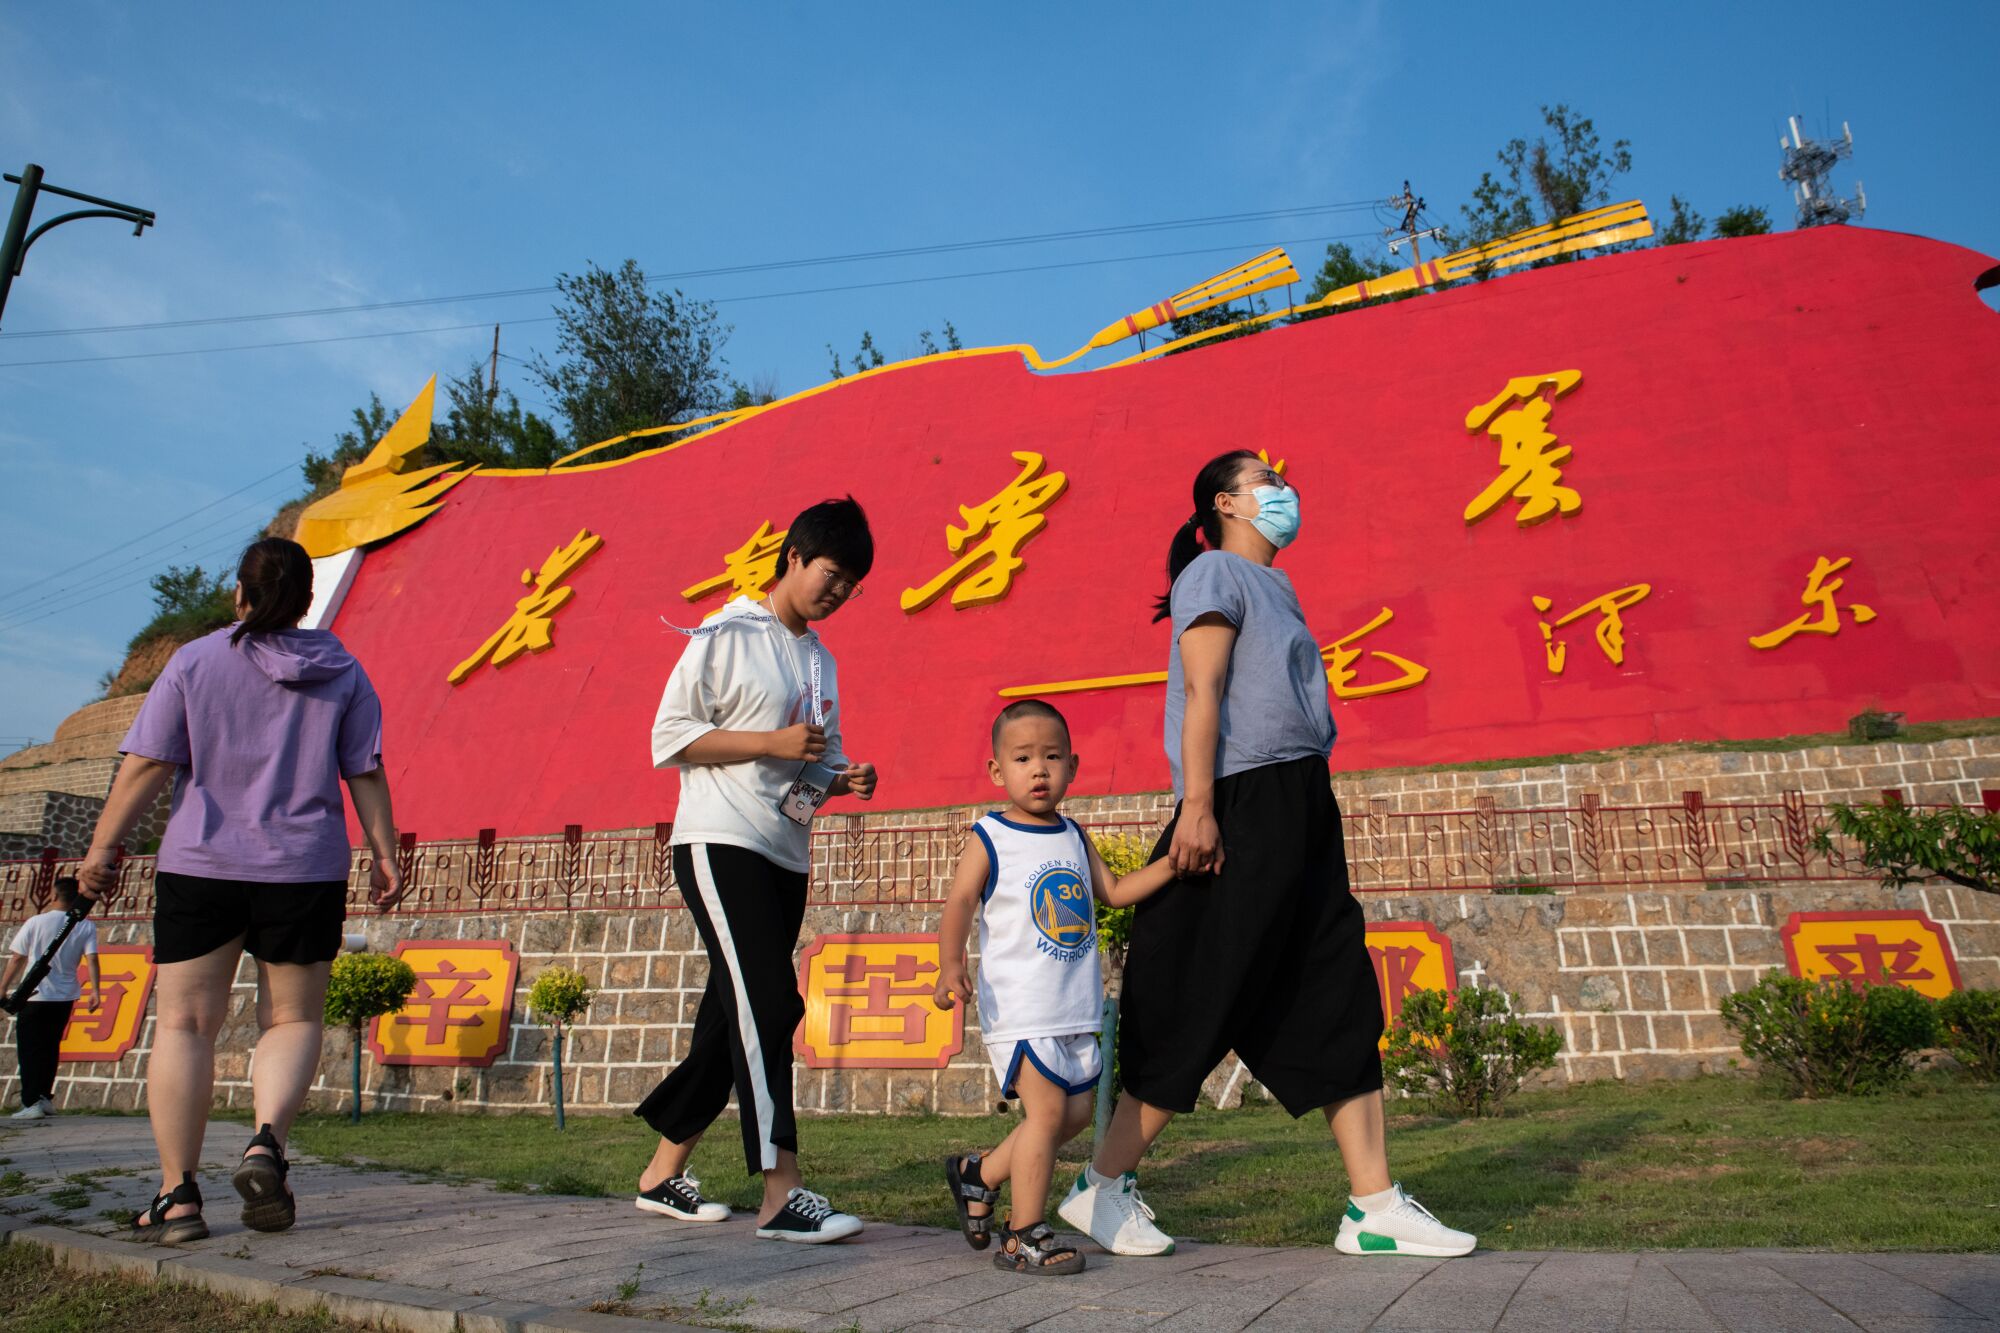 People walk past a large red banner with Chinese characters in gold stretching across a wall